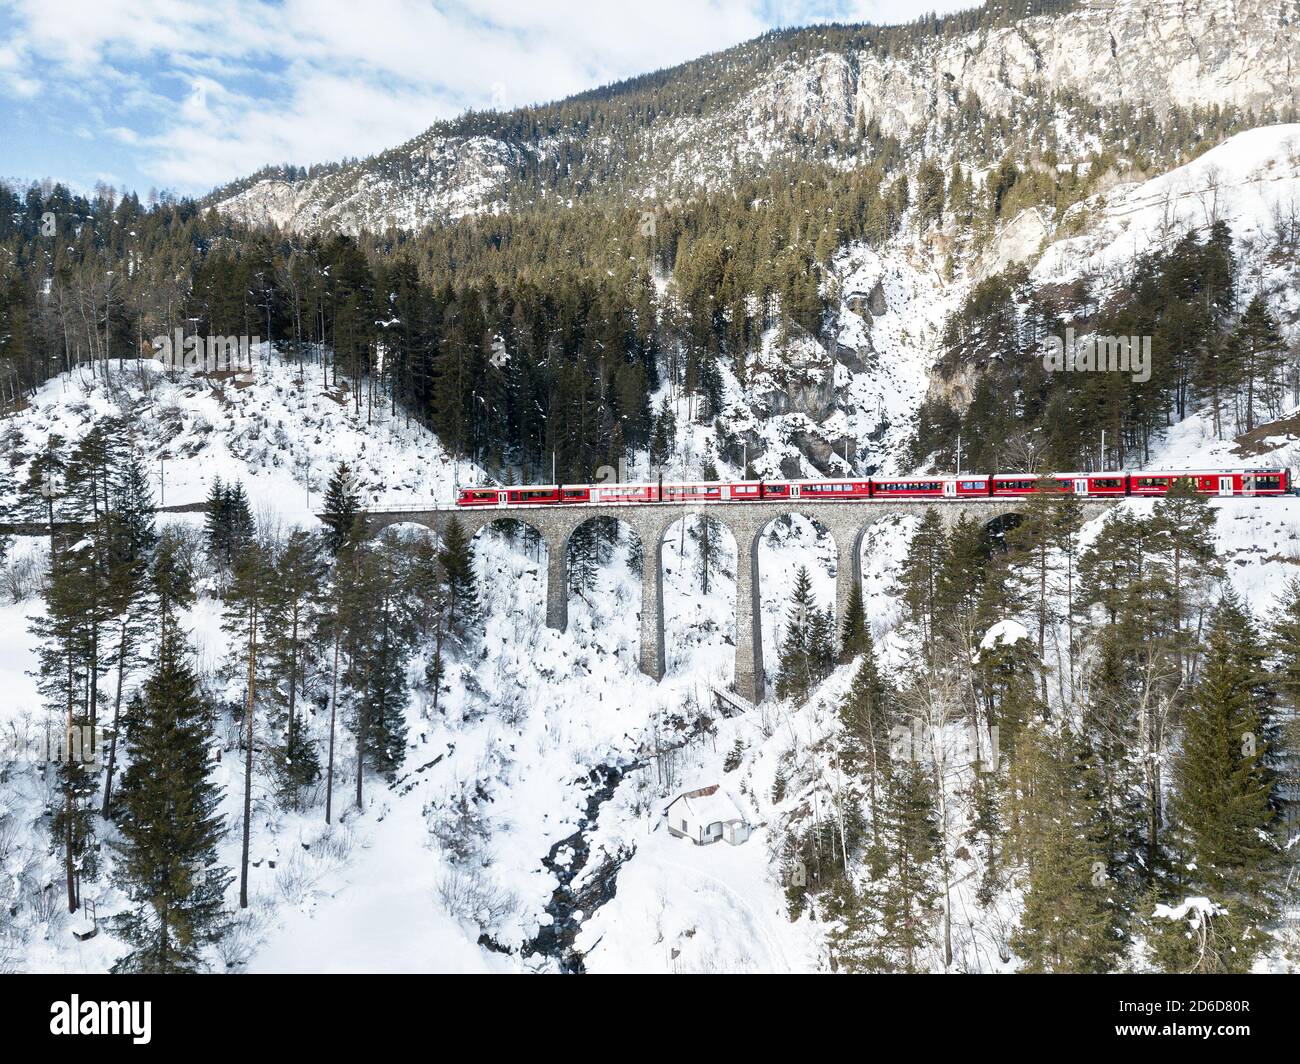 Filisur Switzerland - January 31. 2019: A red passenger Swiss train passing on the Schmitten viaduct, which is on the same line with Landwasser Viaduc Stock Photo